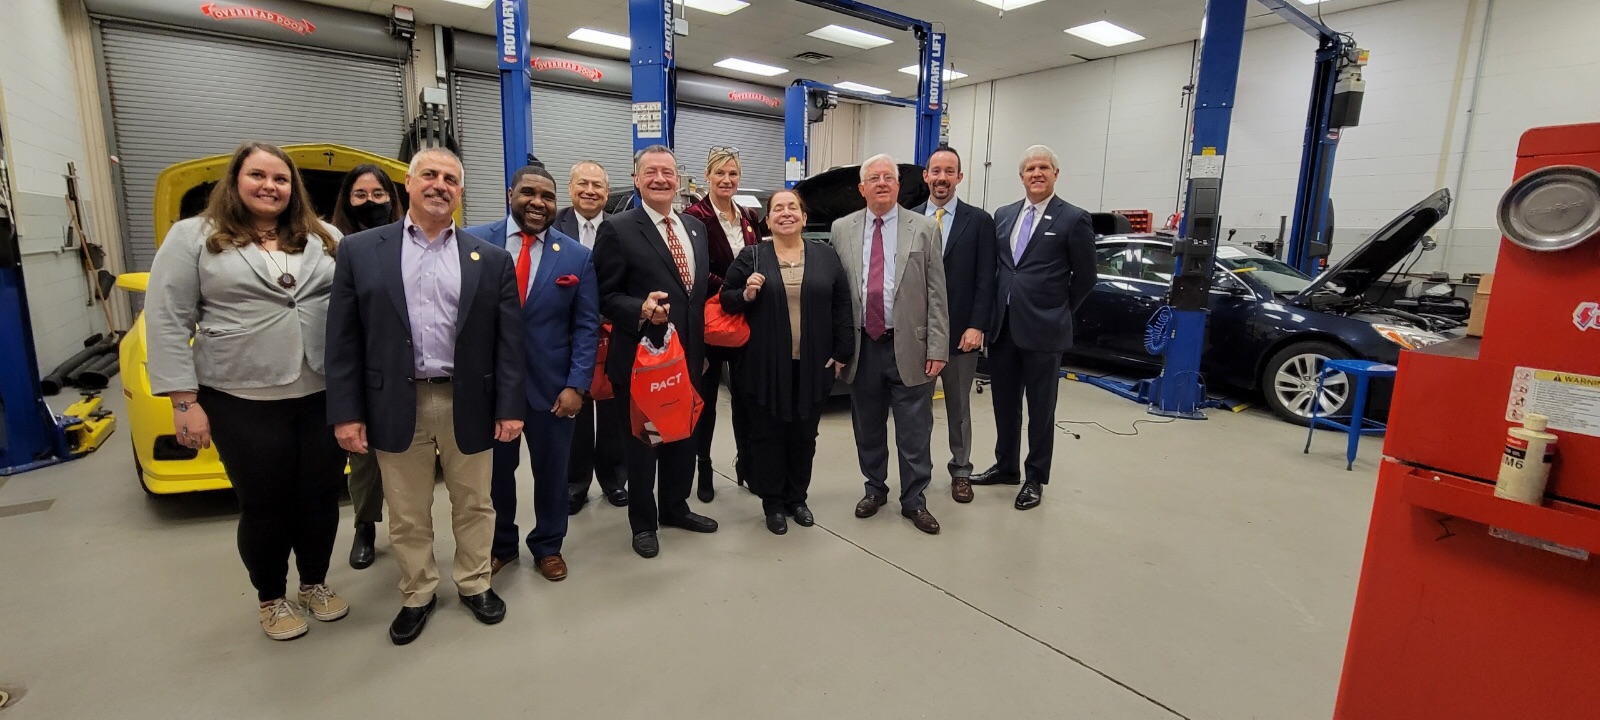 Comptroller on a tour of Suffolk County Community College’s Automotive Technology Program